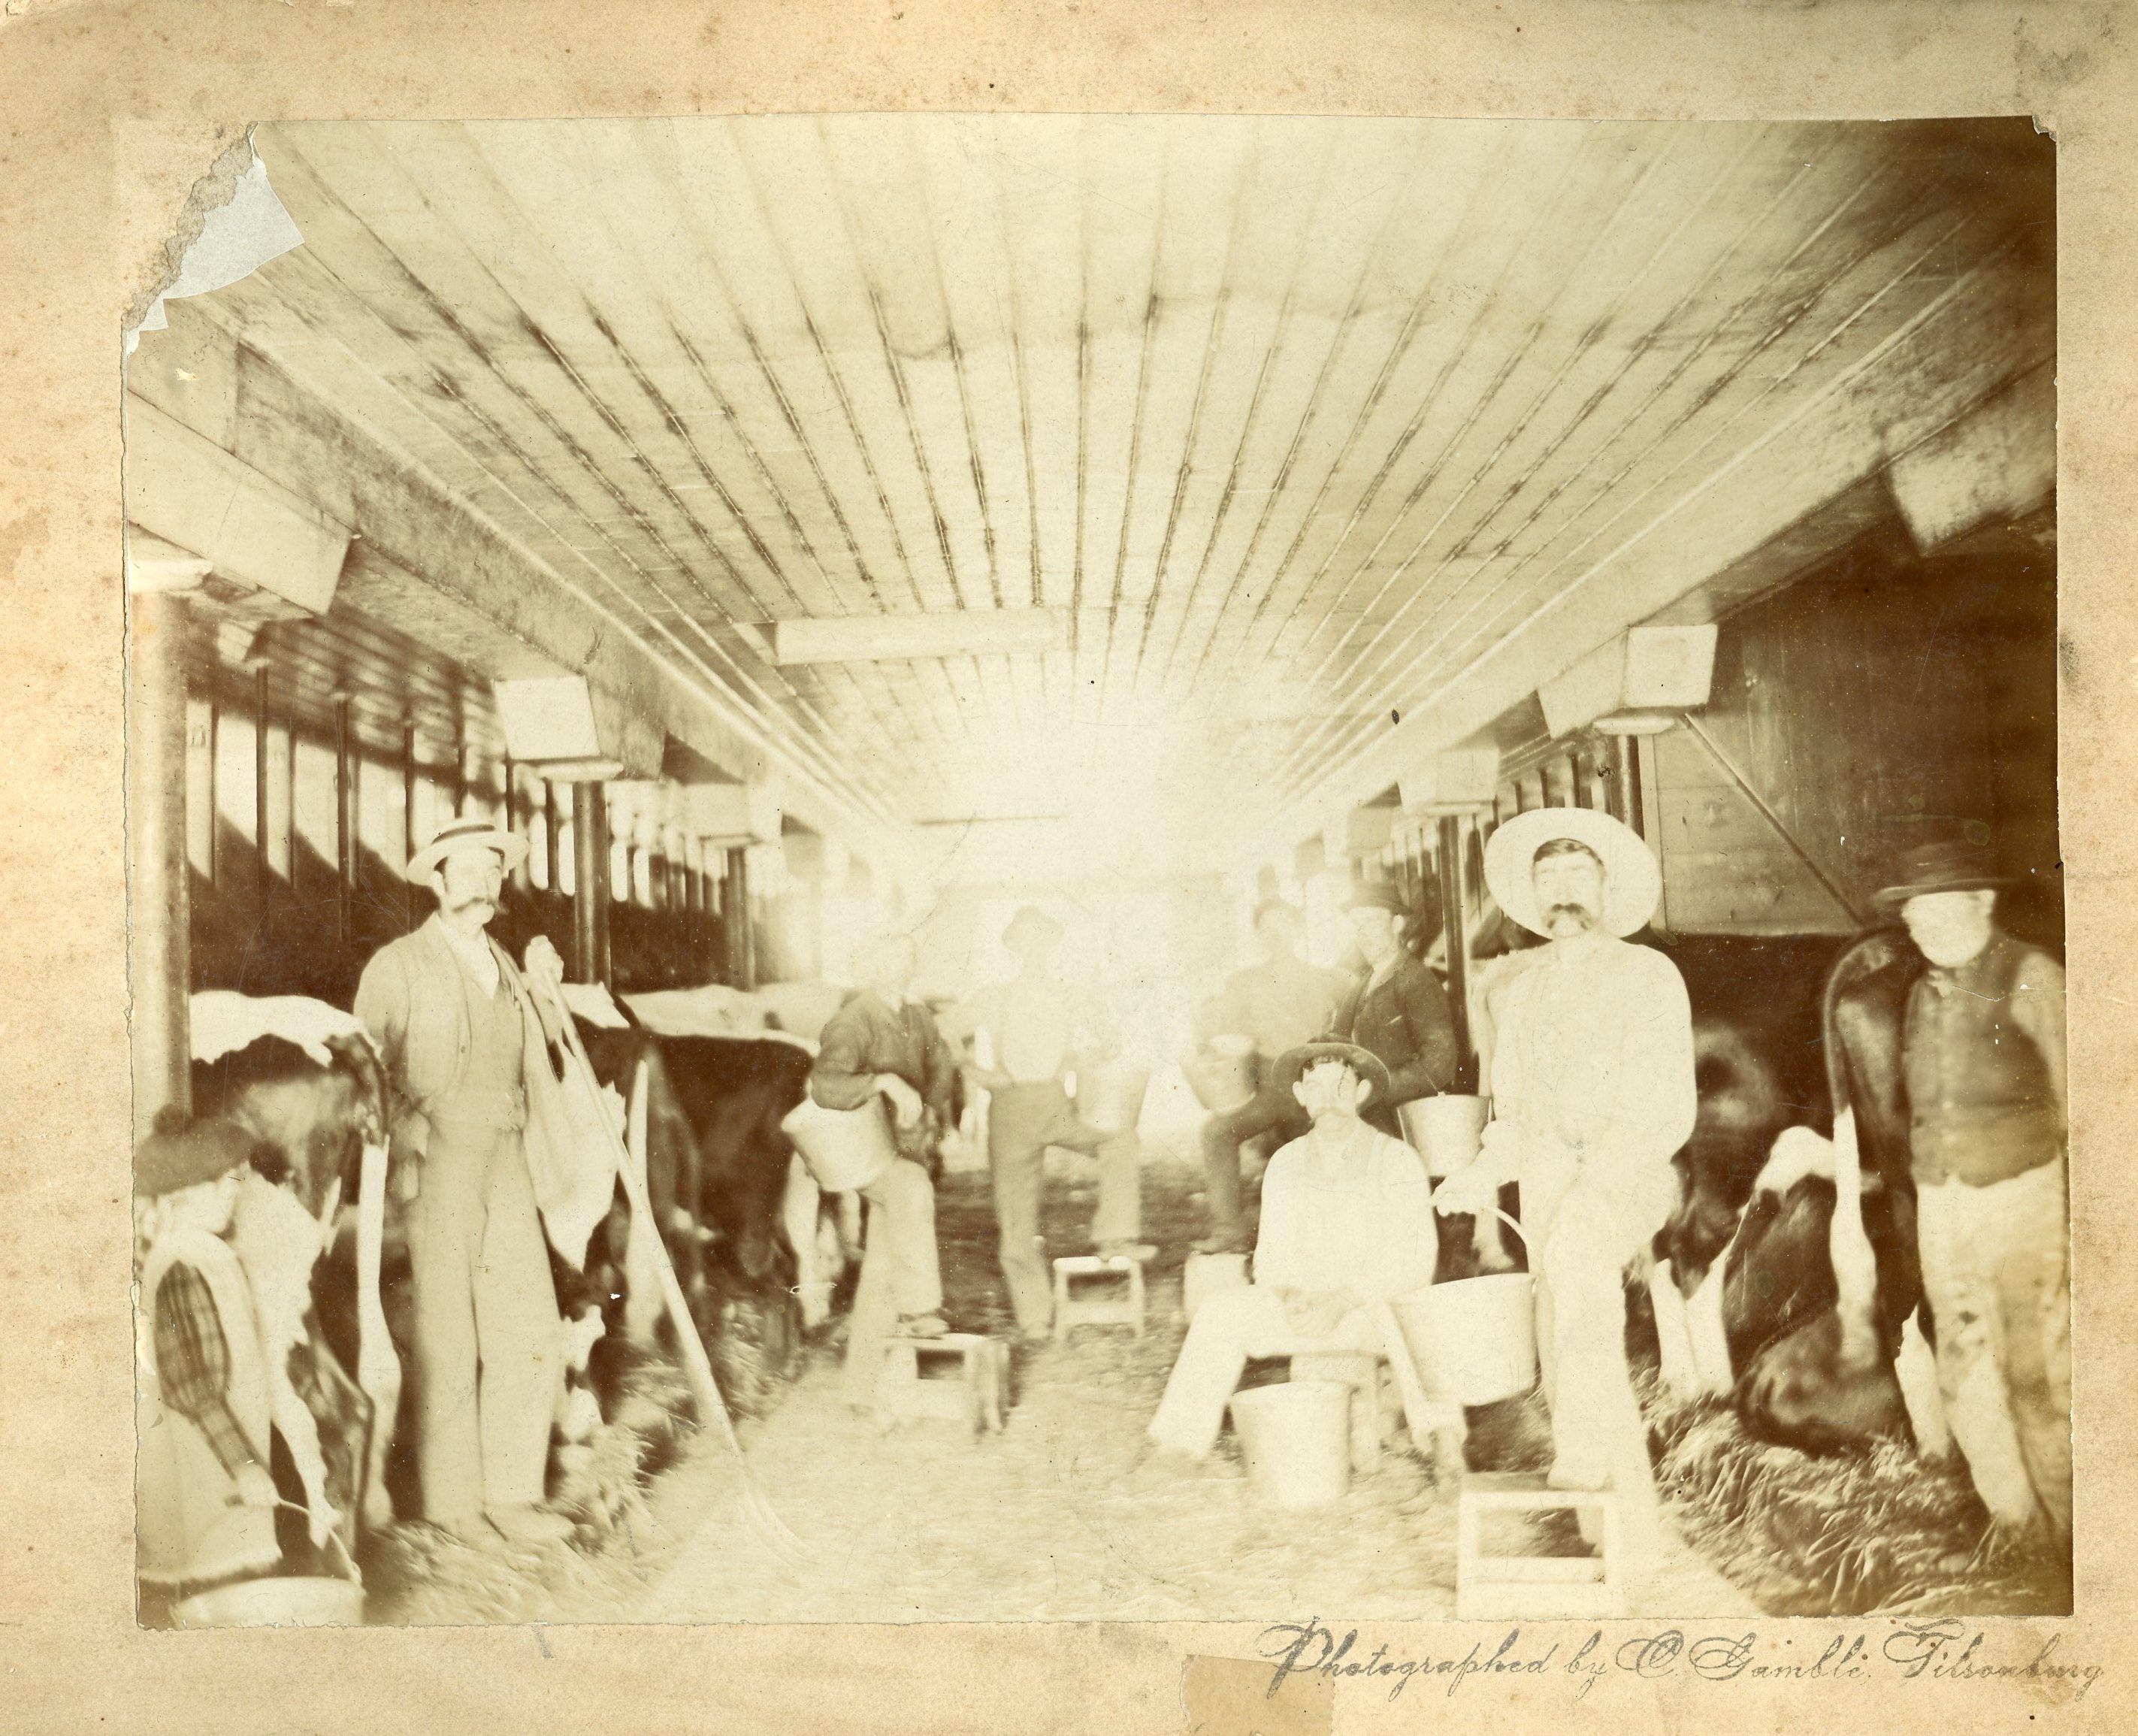 Interior of the Annandale barn. Black and white cows are standing in stalls. Eight man are posing in the barn holding metal pails and pitchforks. A small child is standing to the left of the photo holding a pail and wearing a hat.